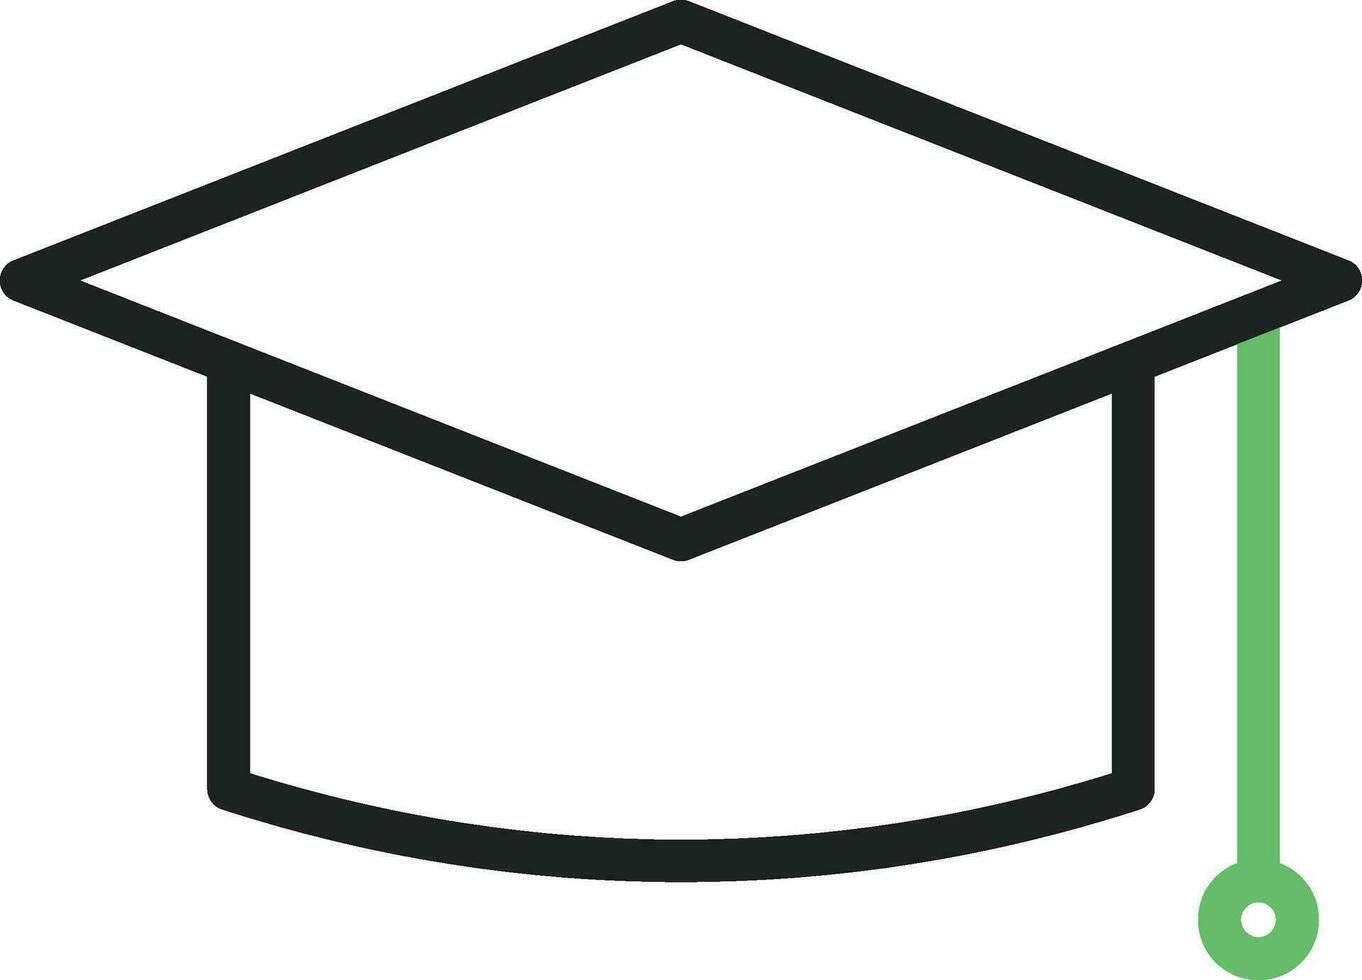 Mortarboard icon vector image. Suitable for mobile apps, web apps and print media.